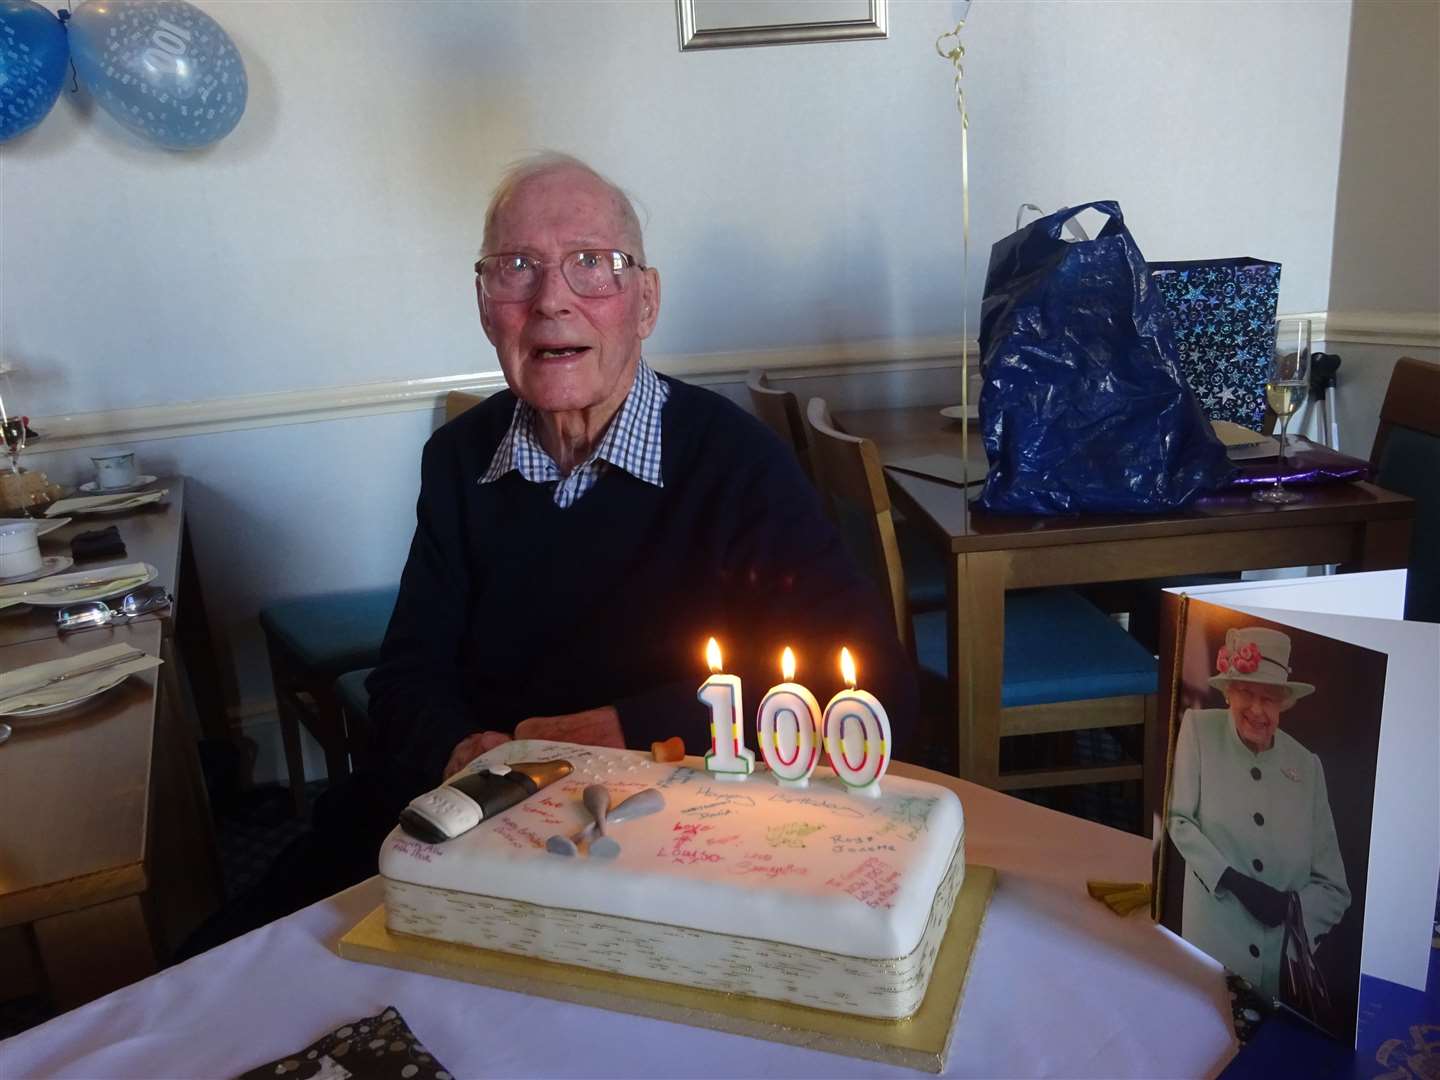 Mr Abernethy photographed with his 100th birthday cake and card from the Queen.